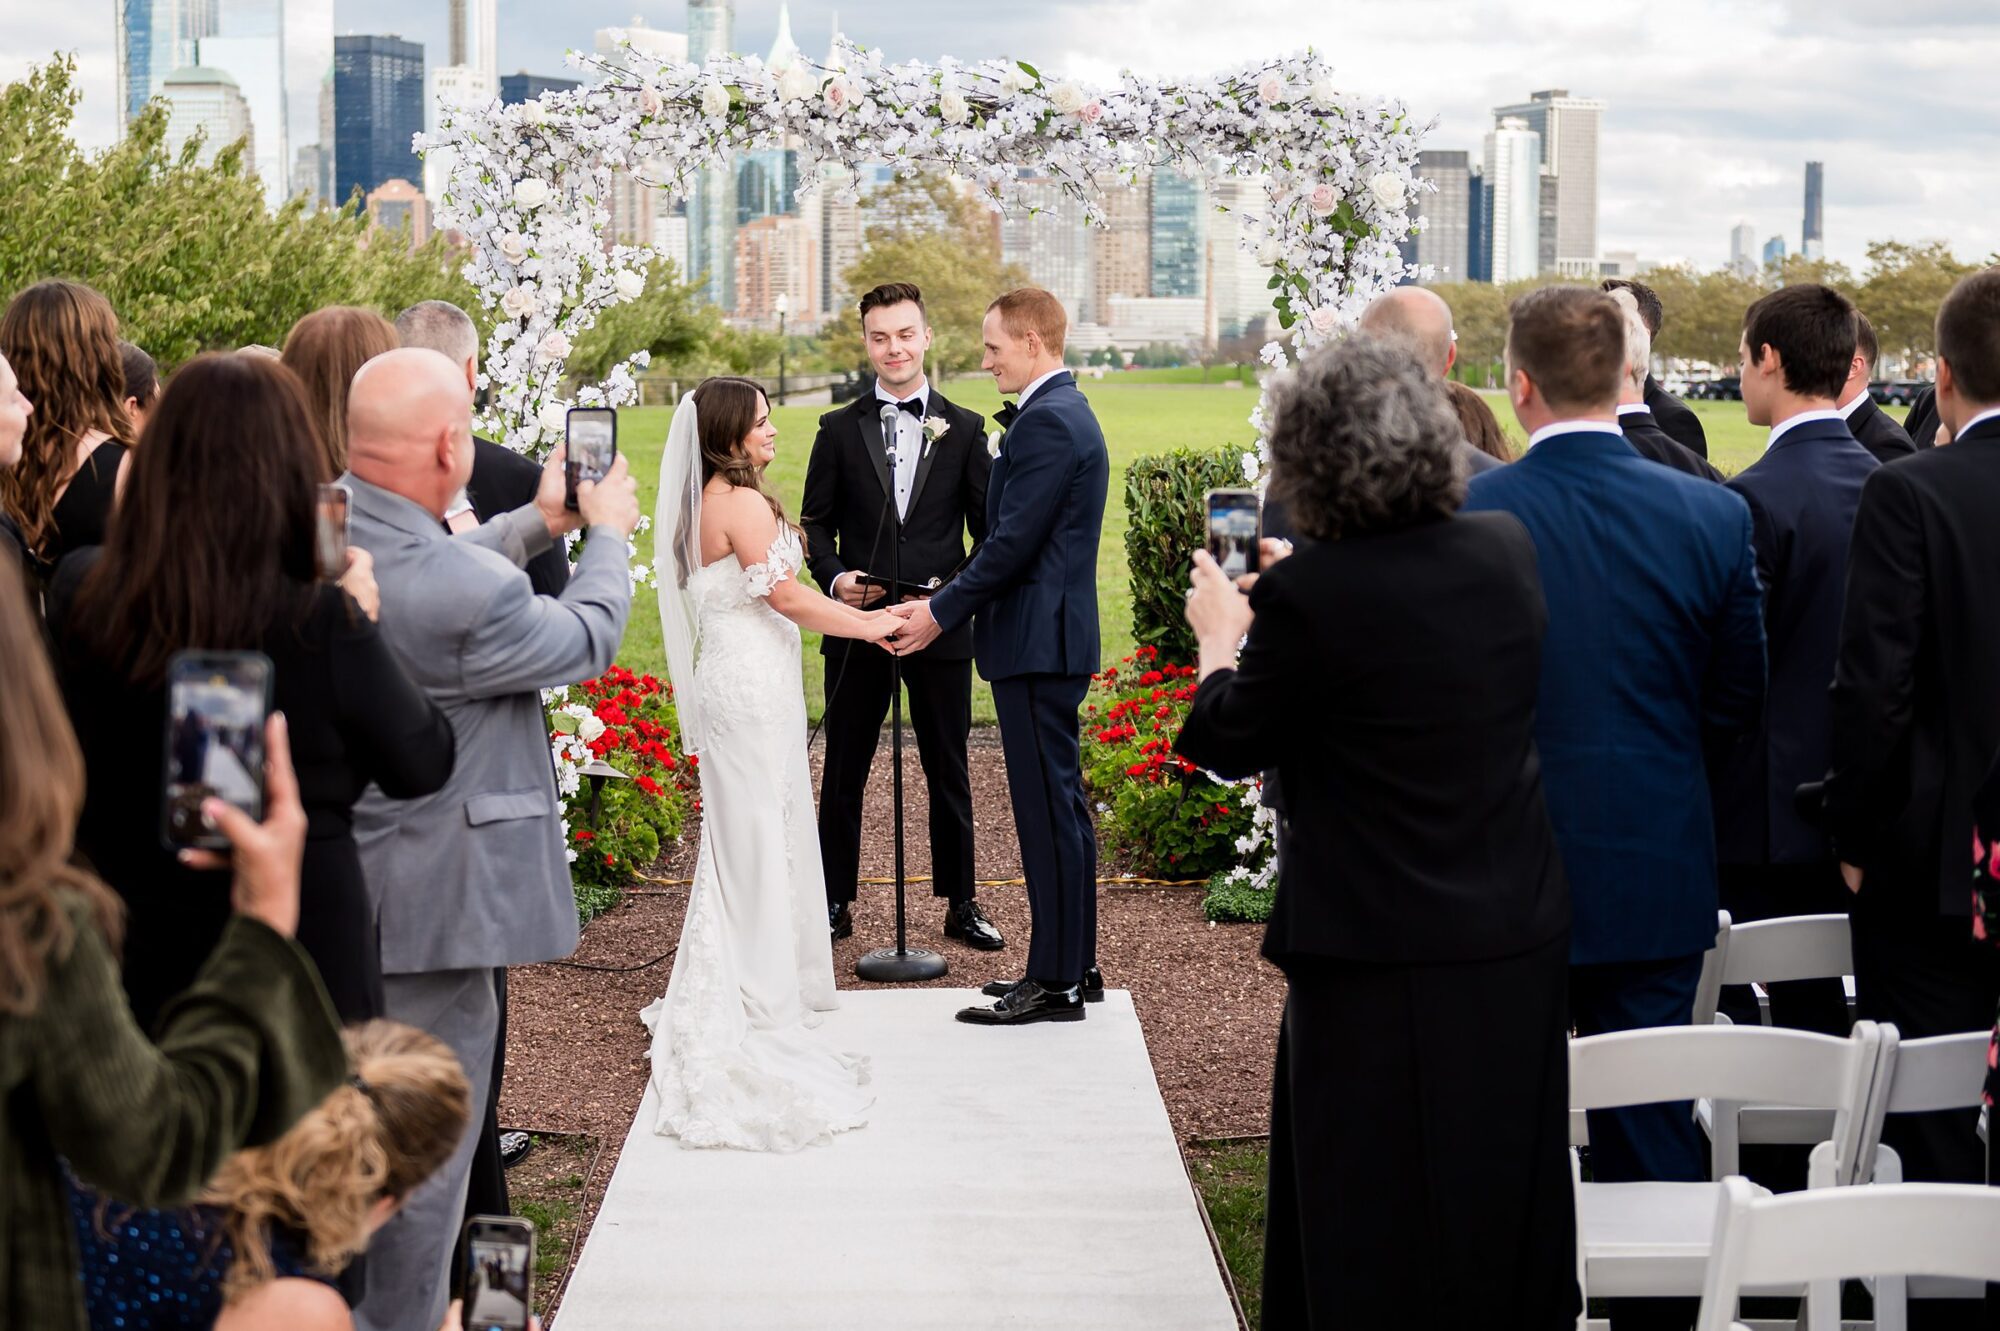 A bride and groom exchange vows in front of a city skyline.